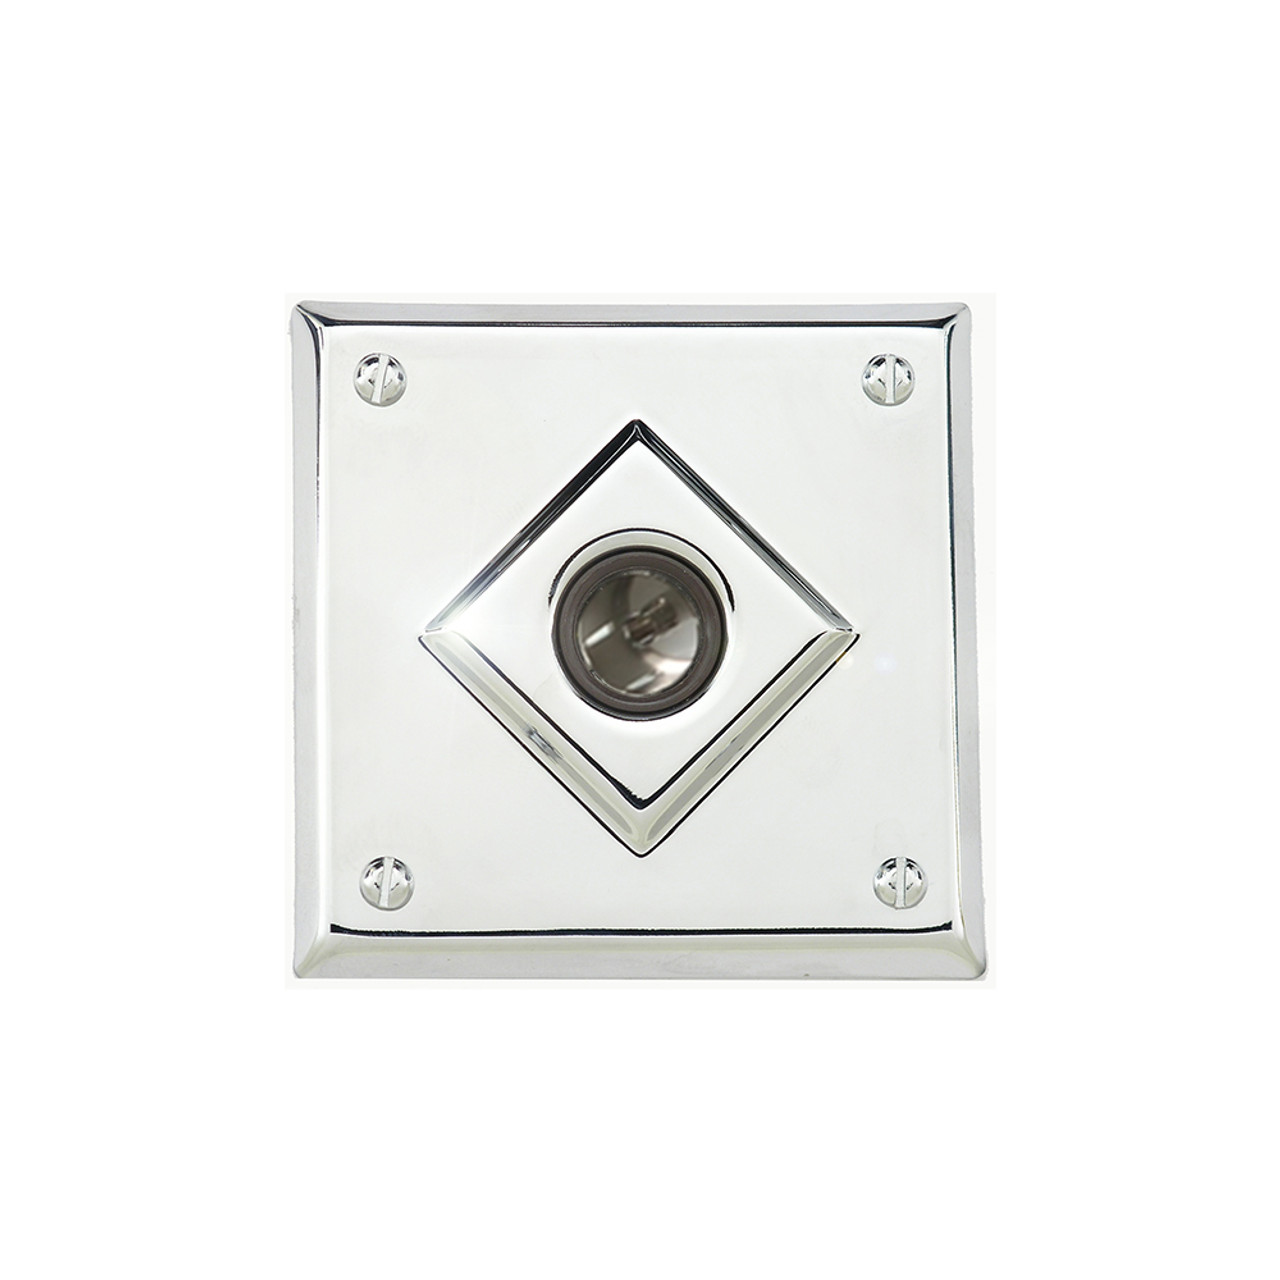 Bungalow / Tudor Pay TV Aerial & Co-Axial TV Sockets-  Chrome Plated